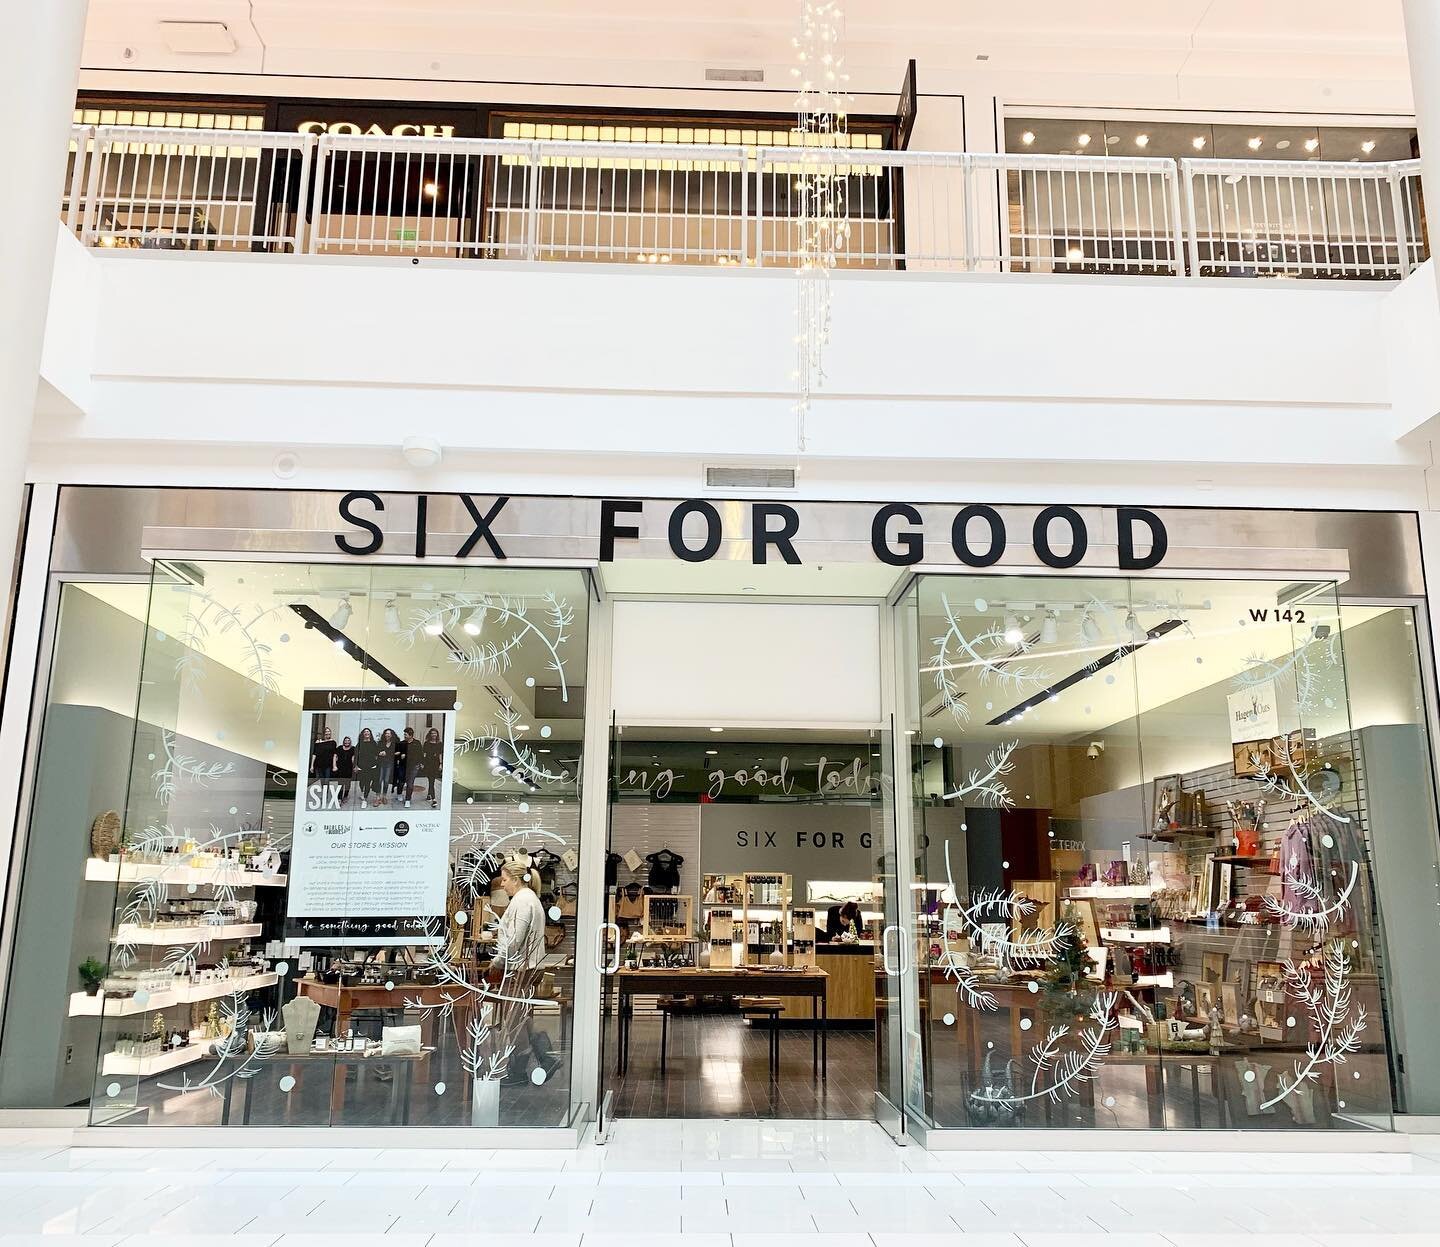 🎶There&rsquo;s a Place For Fun in Your Liiiife&hellip;The Mall of America!🎶 sing along if you&rsquo;re over 30 😂

Come check out our newest @sixforgood store that&rsquo;s poppin&rsquo; up at the @mallofamerica over the 2022 holiday season 🤍 Shop 